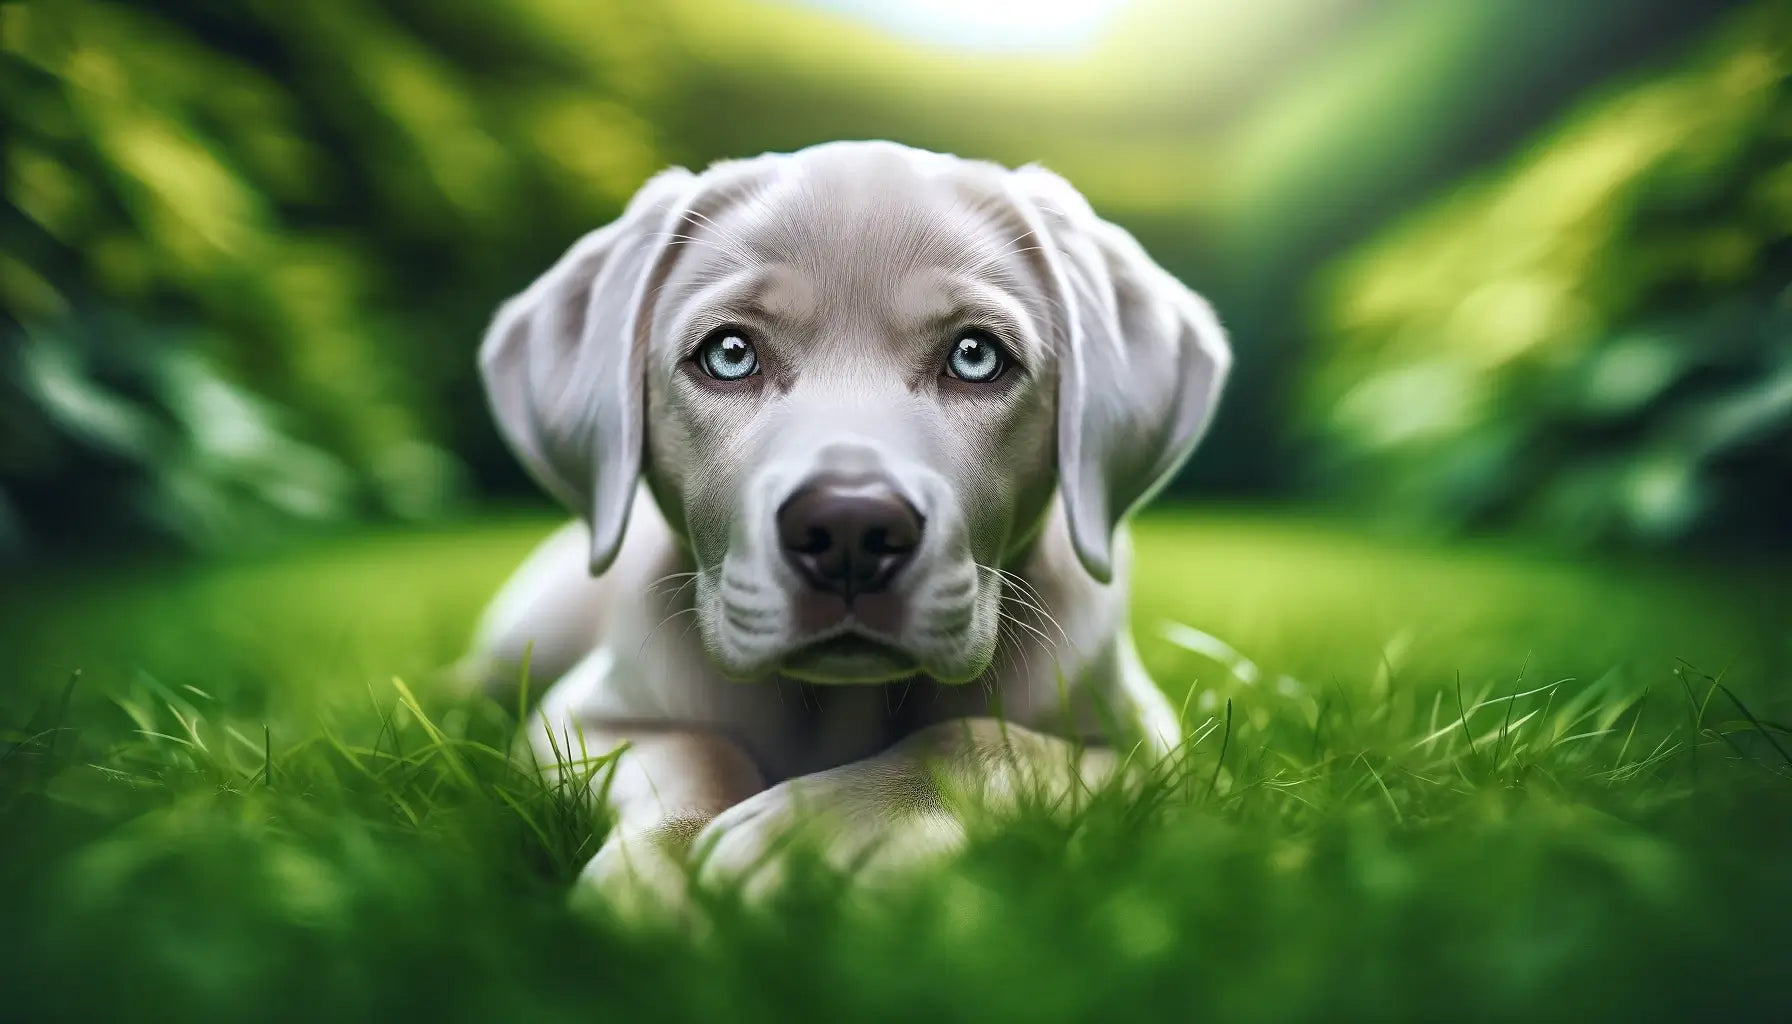 A Silver Lab lying on grass, its contemplative look and light blue eyes offering a glimpse into its gentle nature.